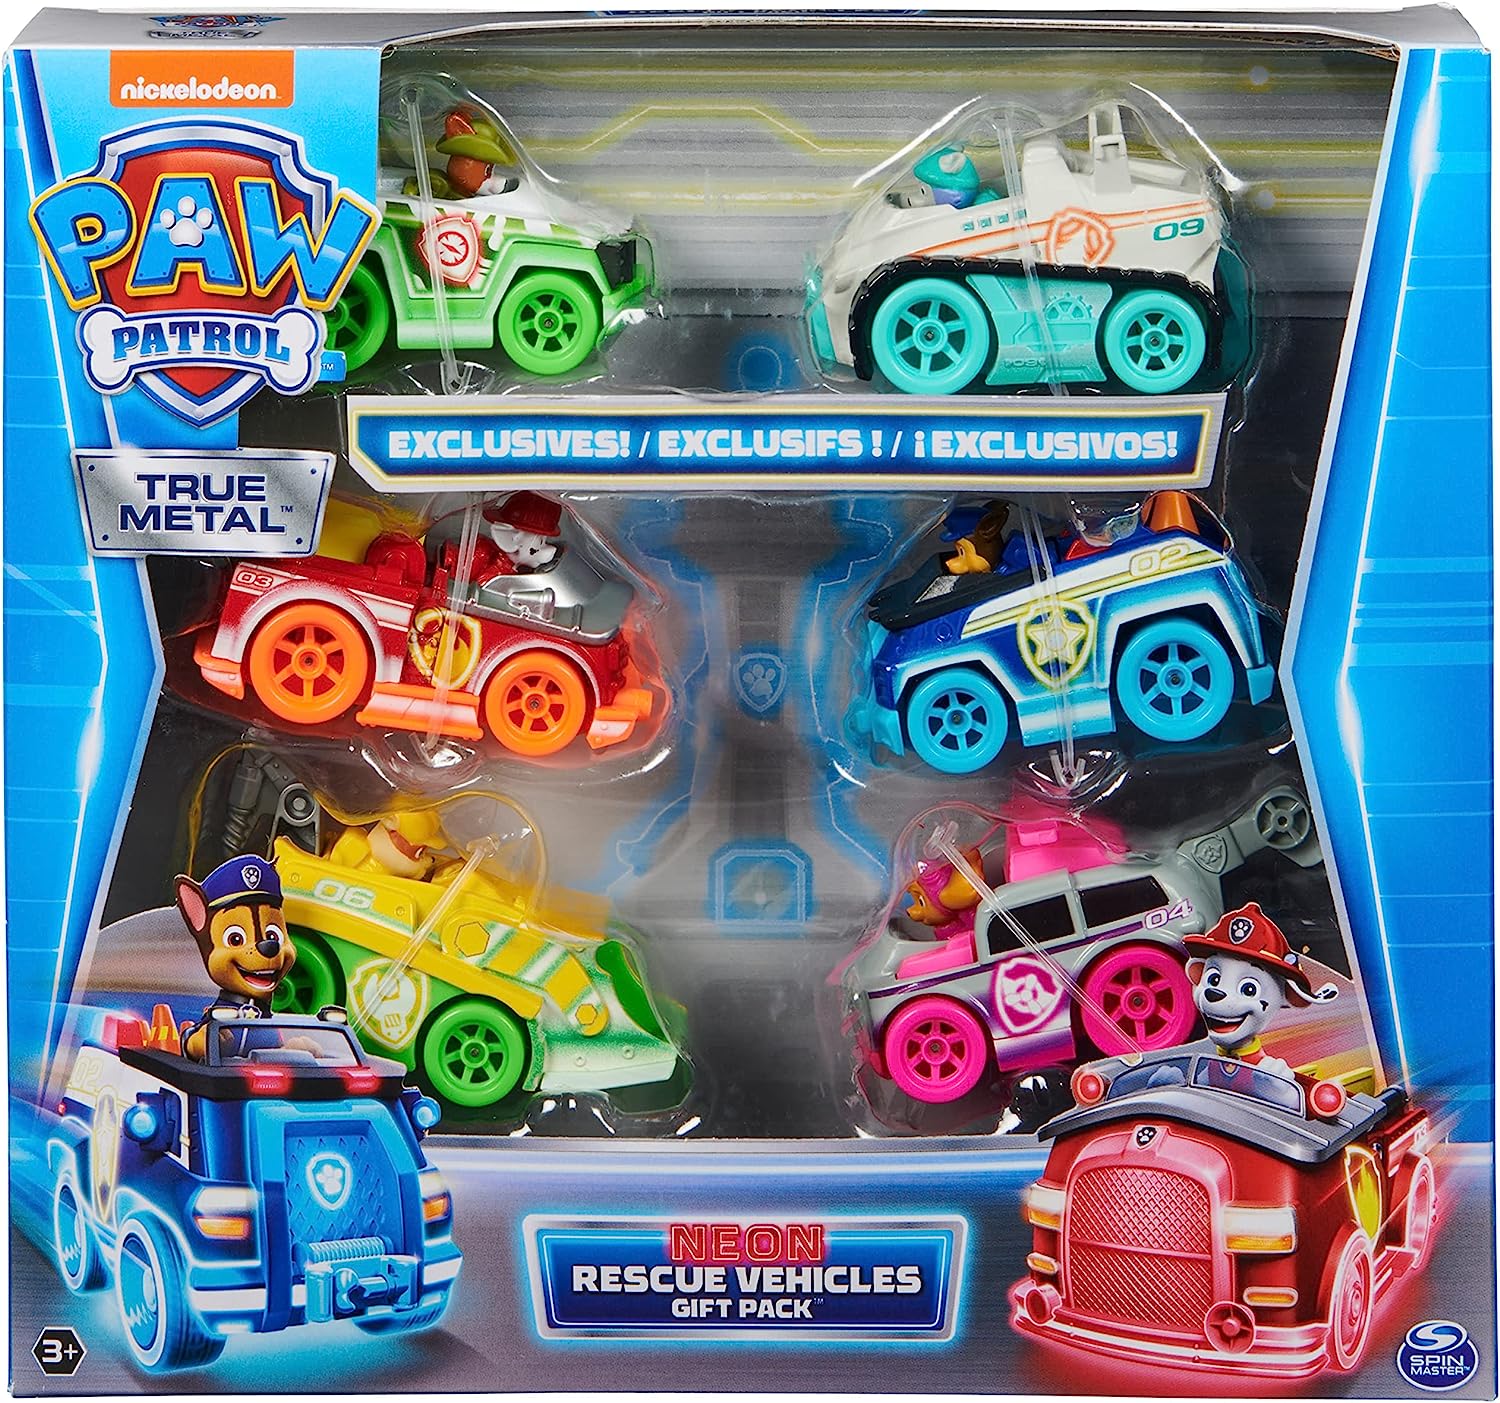 Cheap-paw-patrol-true-metal-neon-rescue-gift-pack